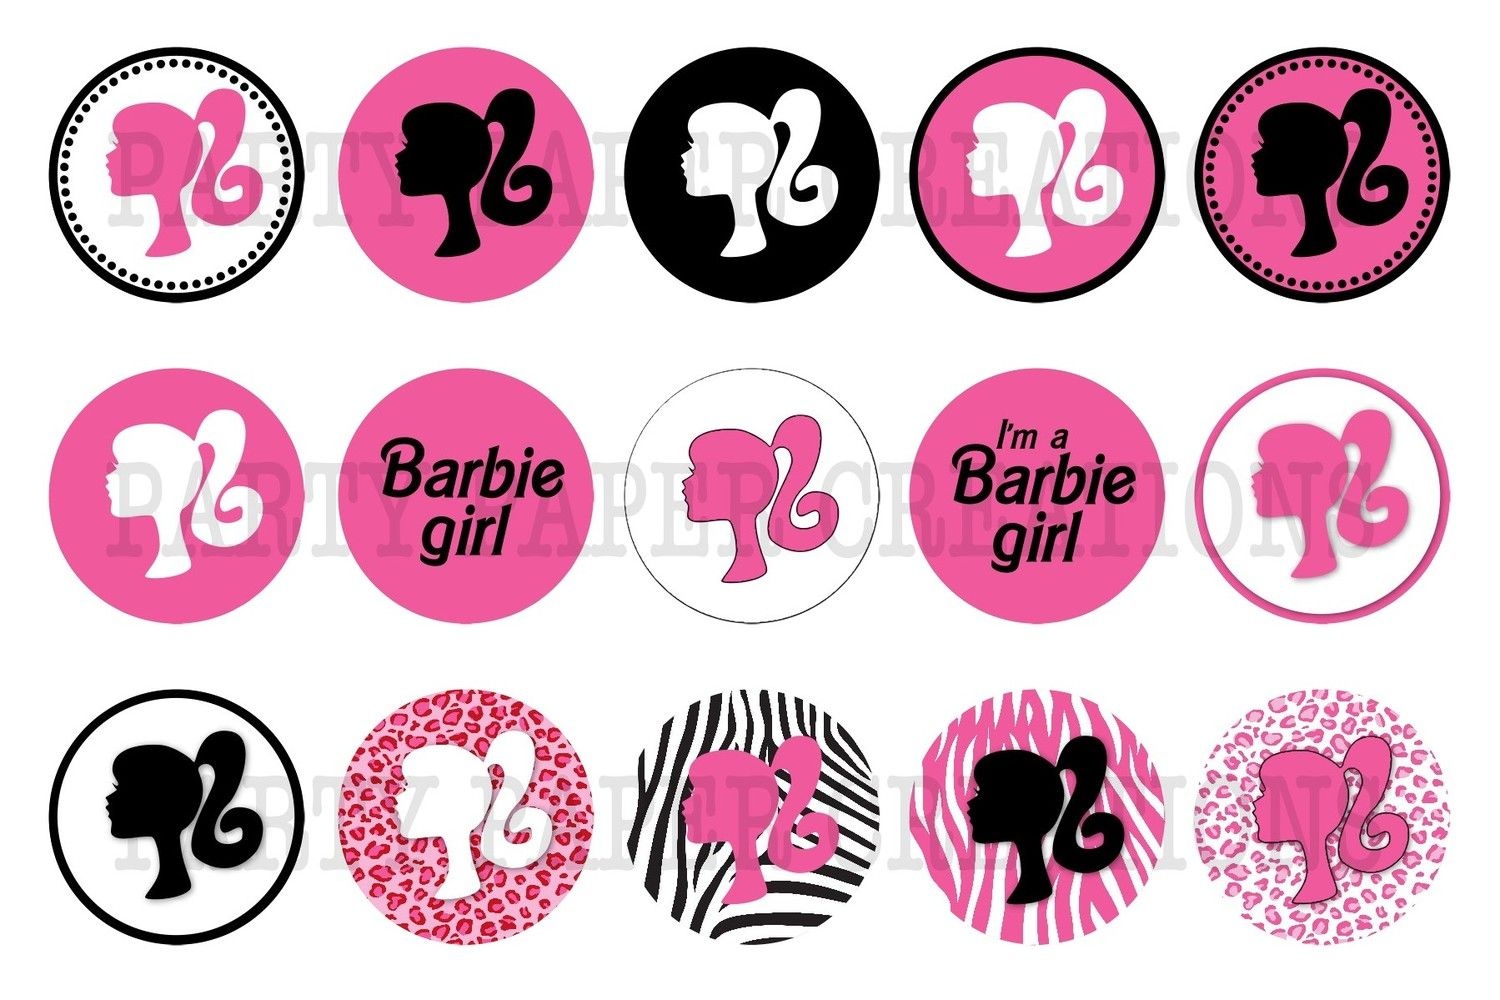 Image Detail For - Barbie Silhouette Clip Art Free | Hawaii - Free Printable Barbie Cupcake Toppers